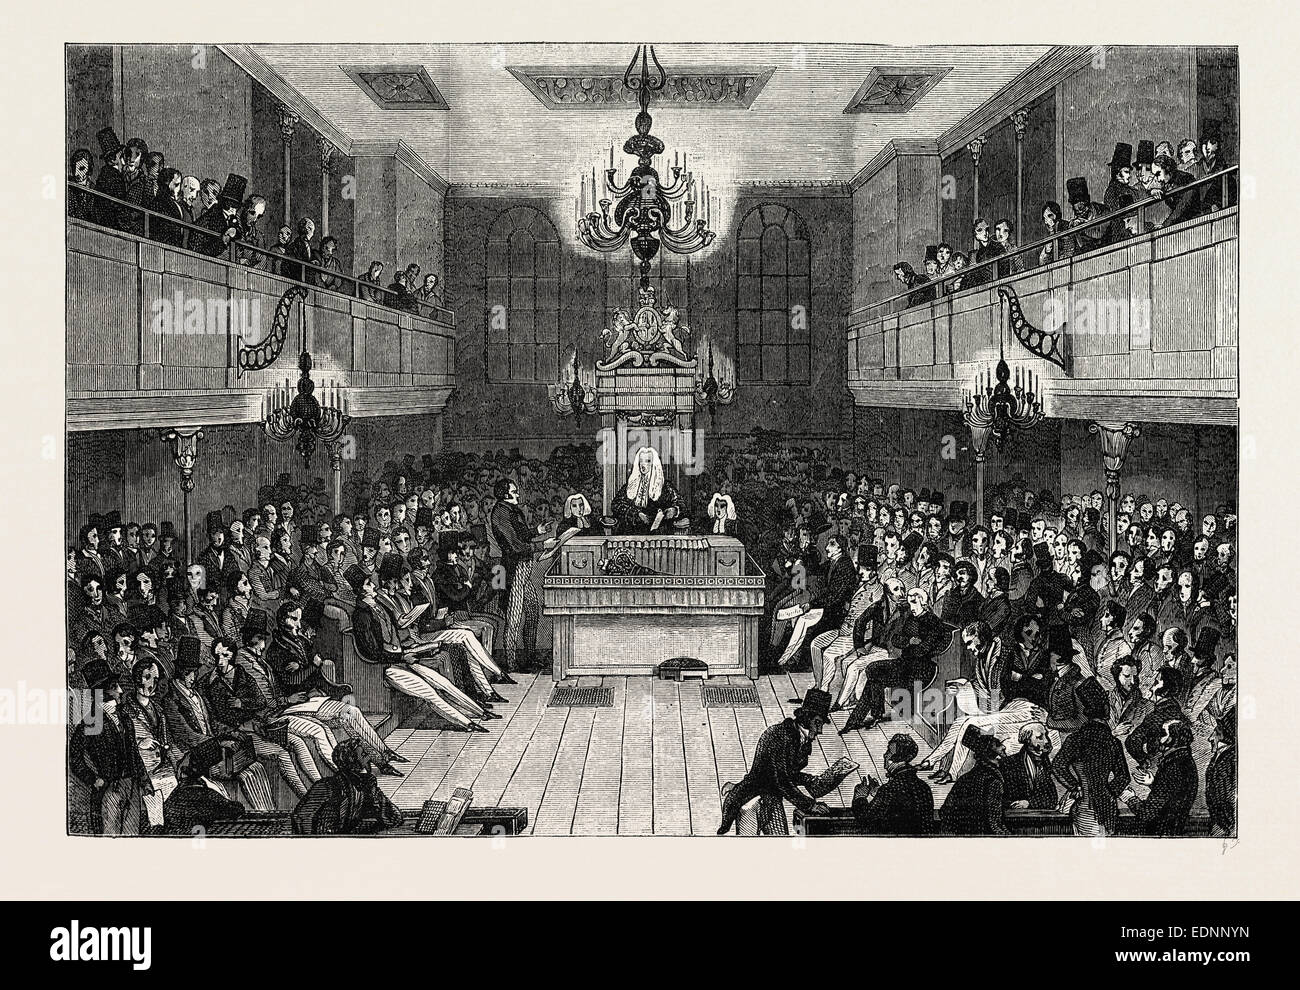 INTERIOR OF THE HOUSE OF COMMONS, 1834. London, UK, 19th century engraving Stock Photo